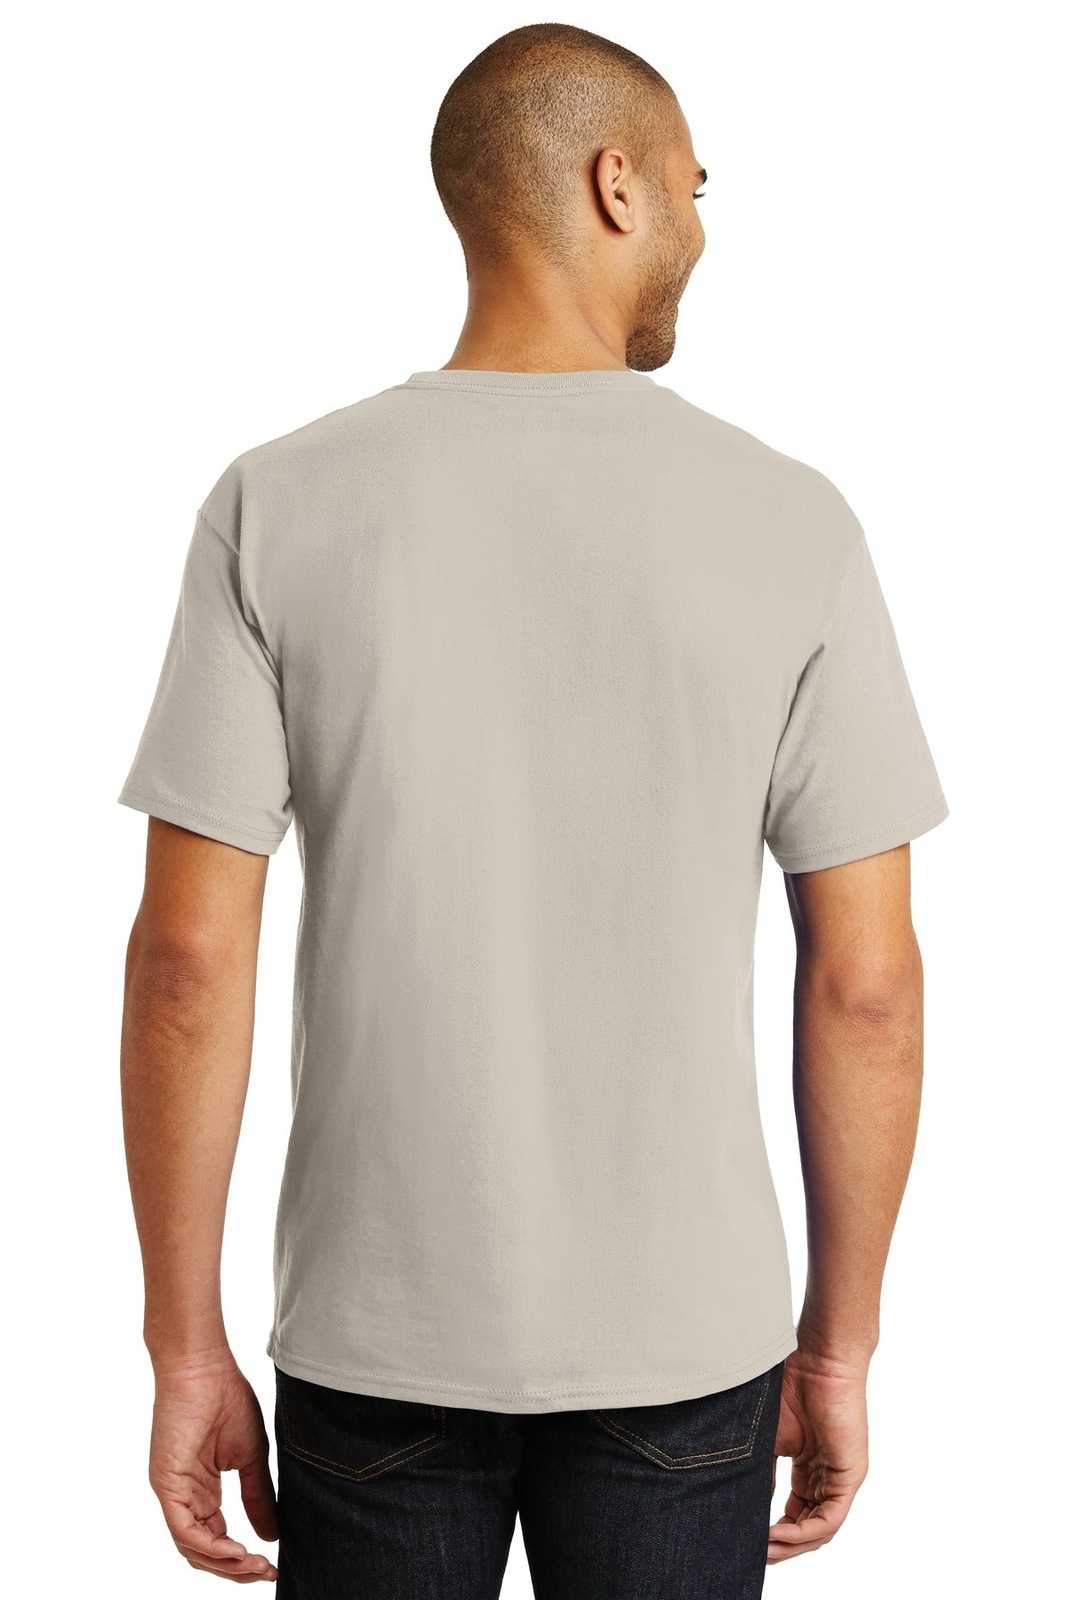 Hanes 5250 Tagless 100% Cotton T-Shirt - Sand - HIT a Double